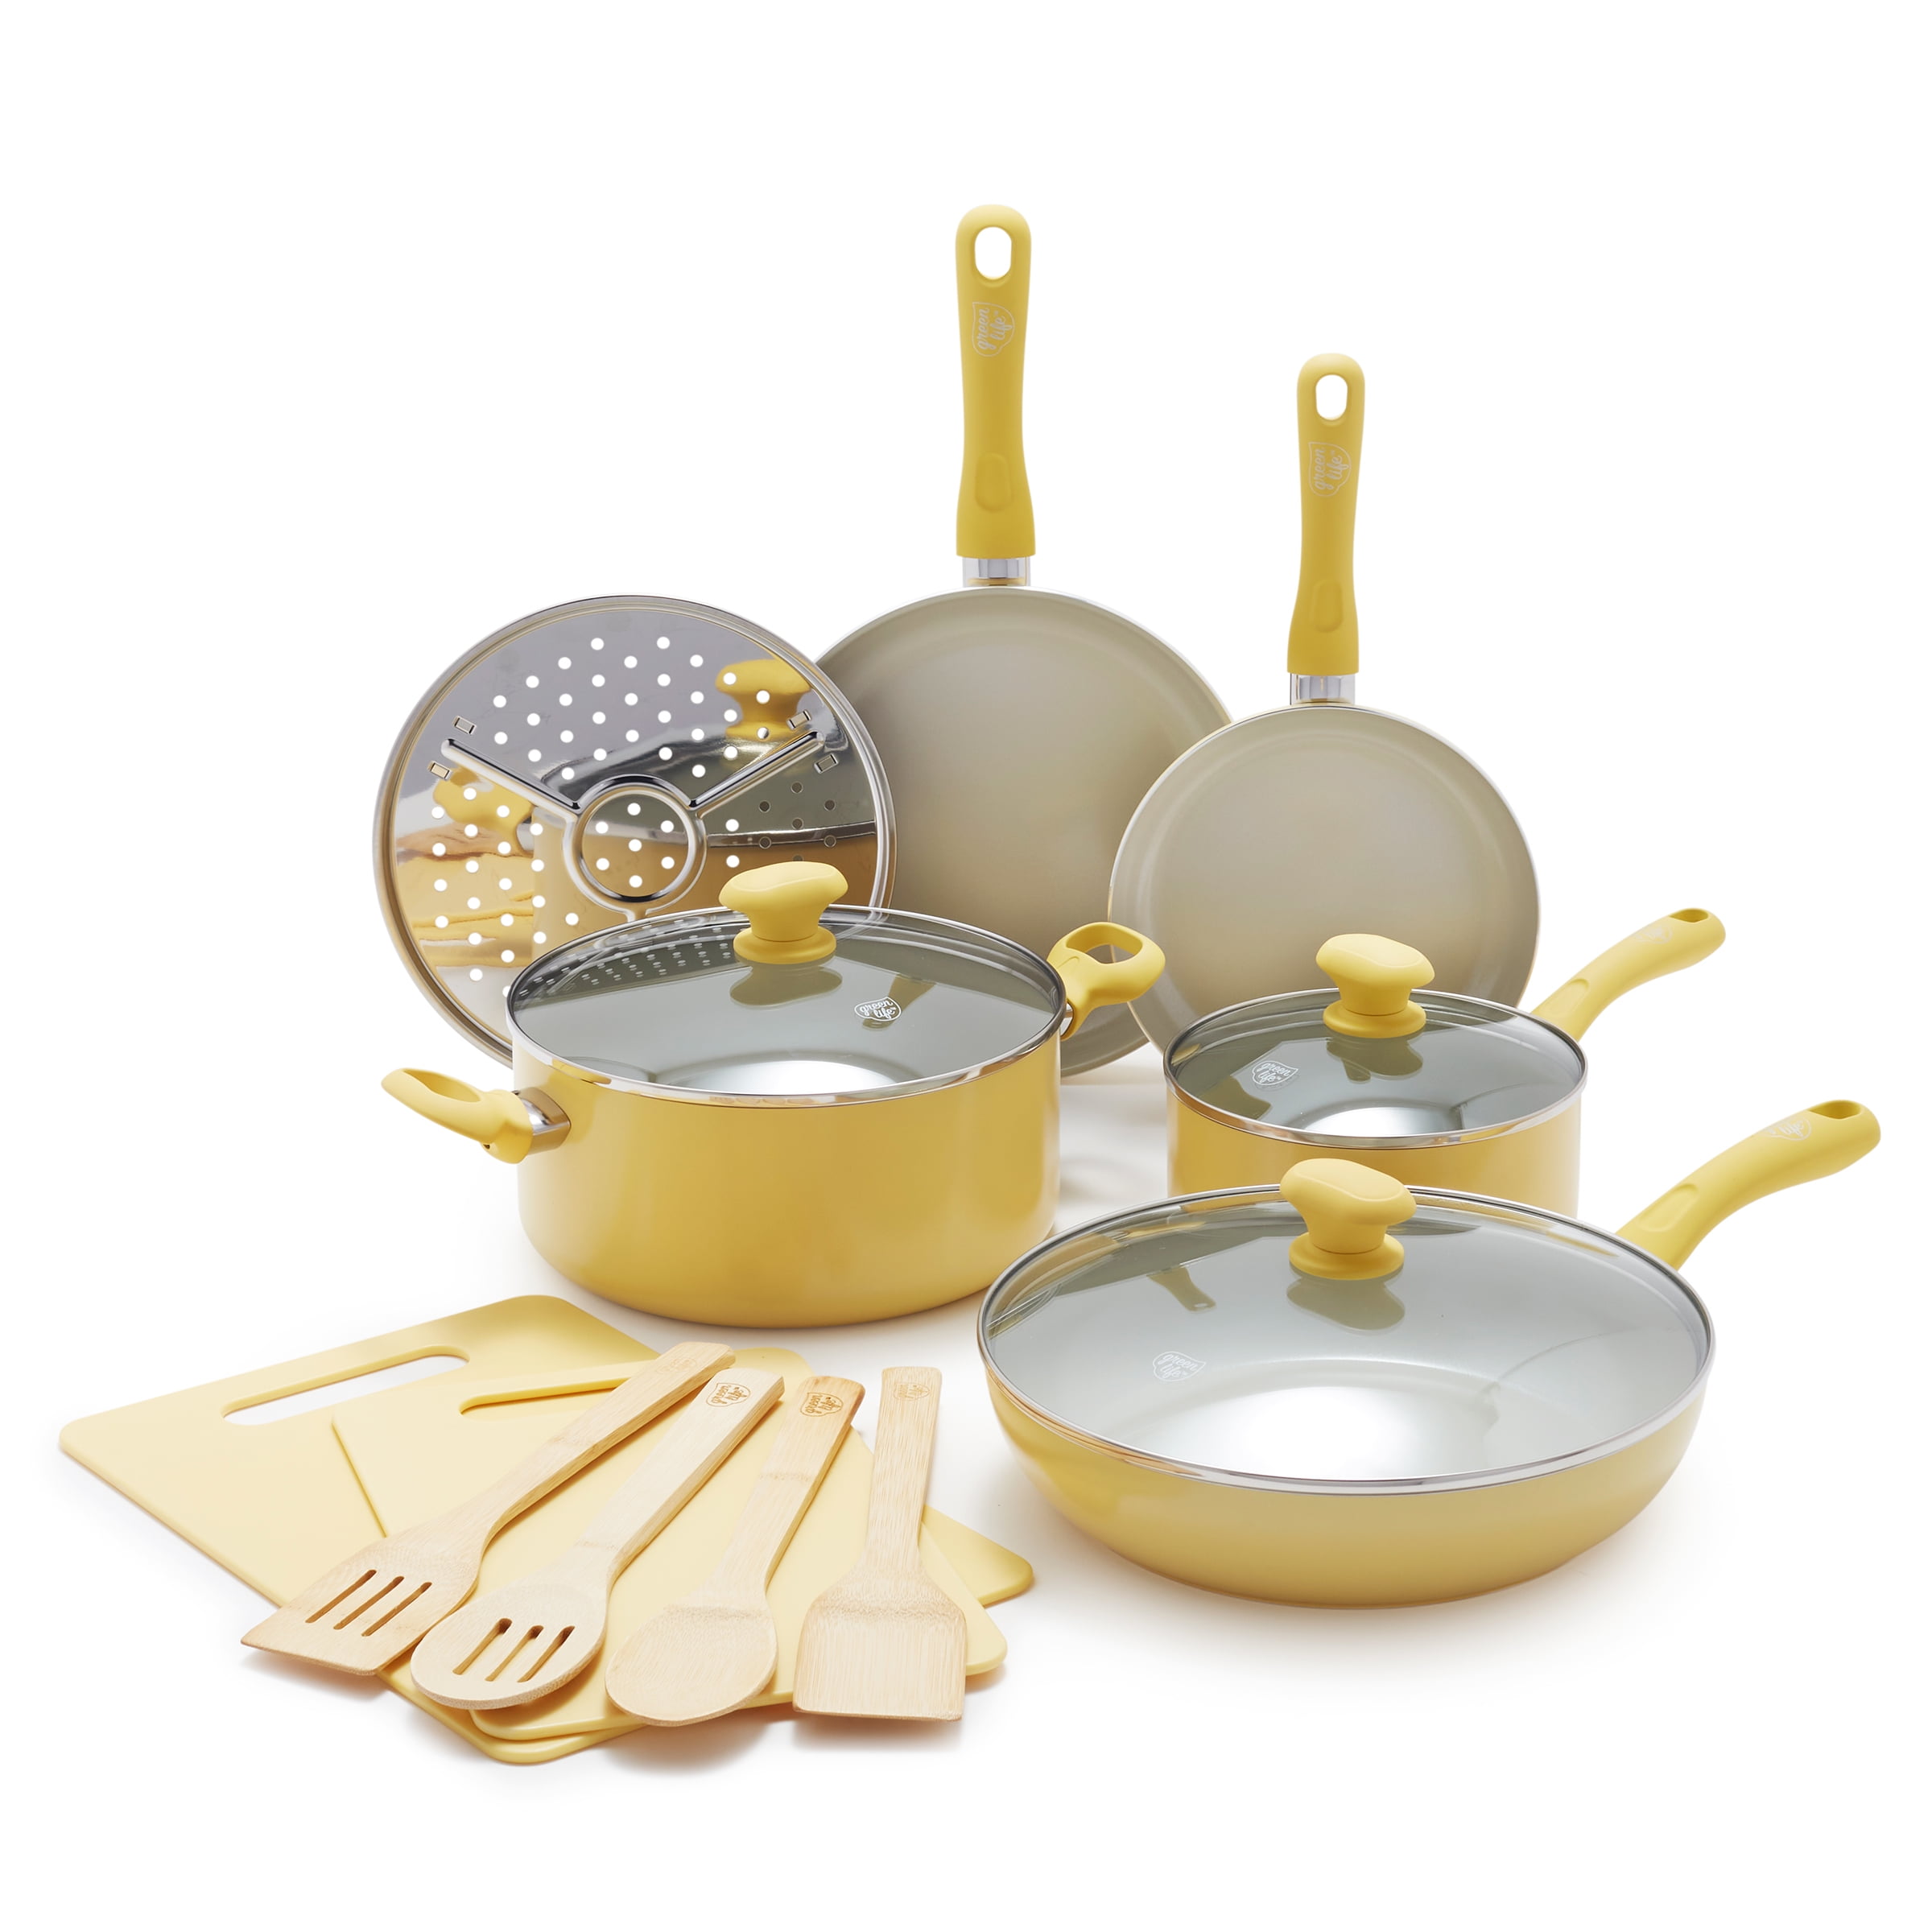 GreenLife 18-Piece Soft Grip Toxin-Free Healthy Ceramic Non-Stick Cookware  Set, Yellow, Dishwasher Safe 